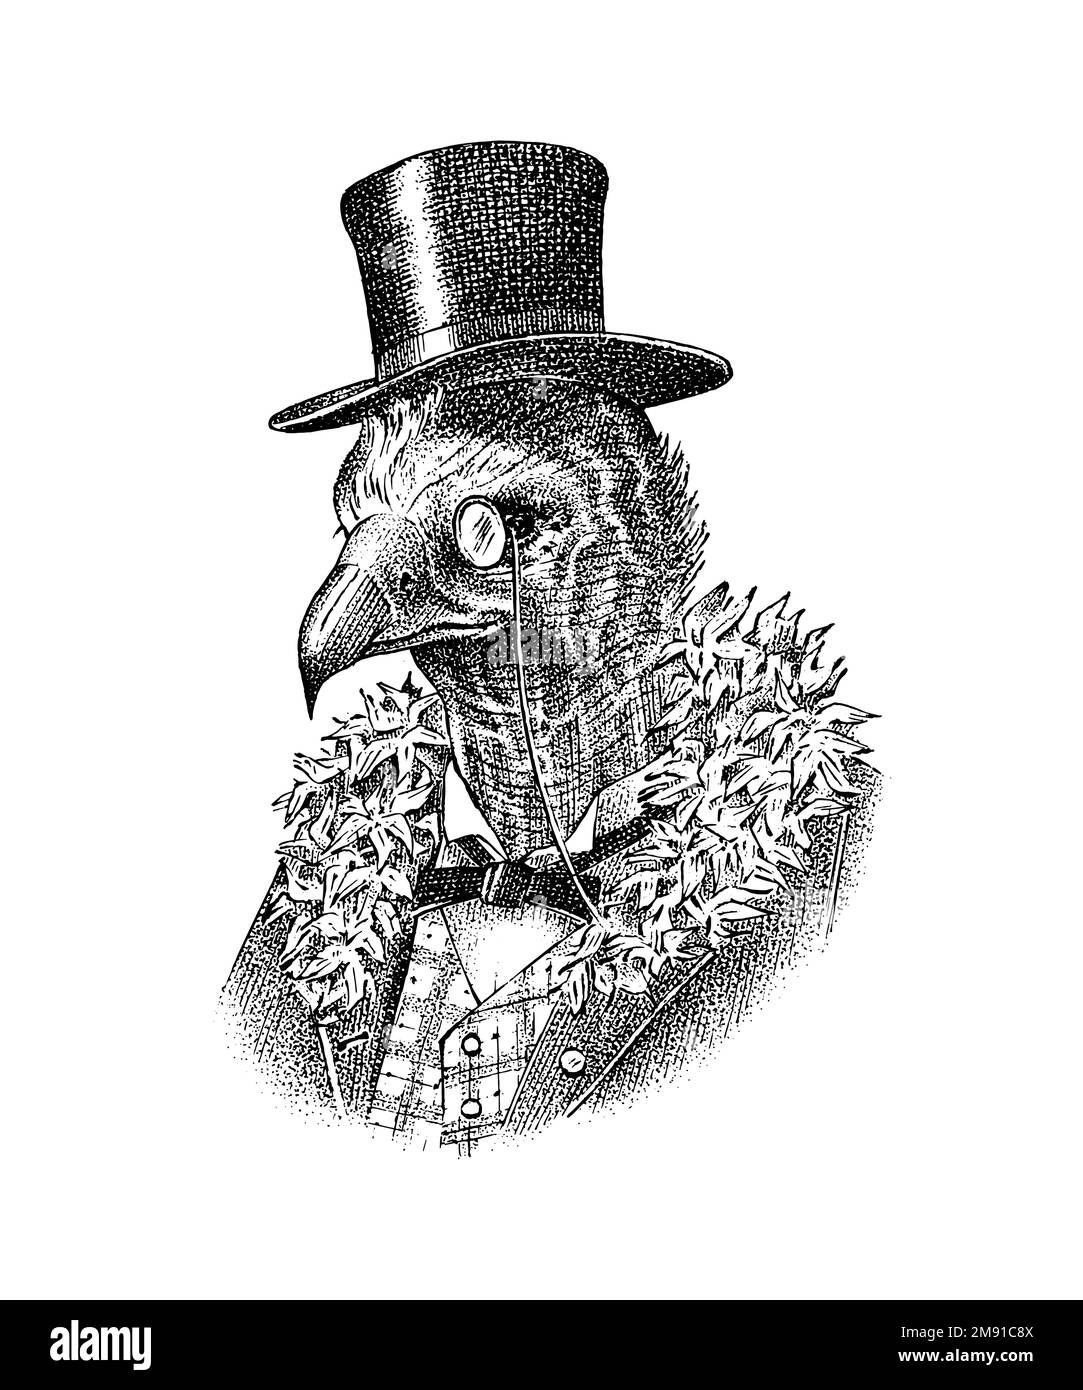 Cinereous vulture character with monocle in a hat. Fashionable Aristocrat or Rich Man. Hand drawn bird. Engraved old monochrome sketch. Stock Vector